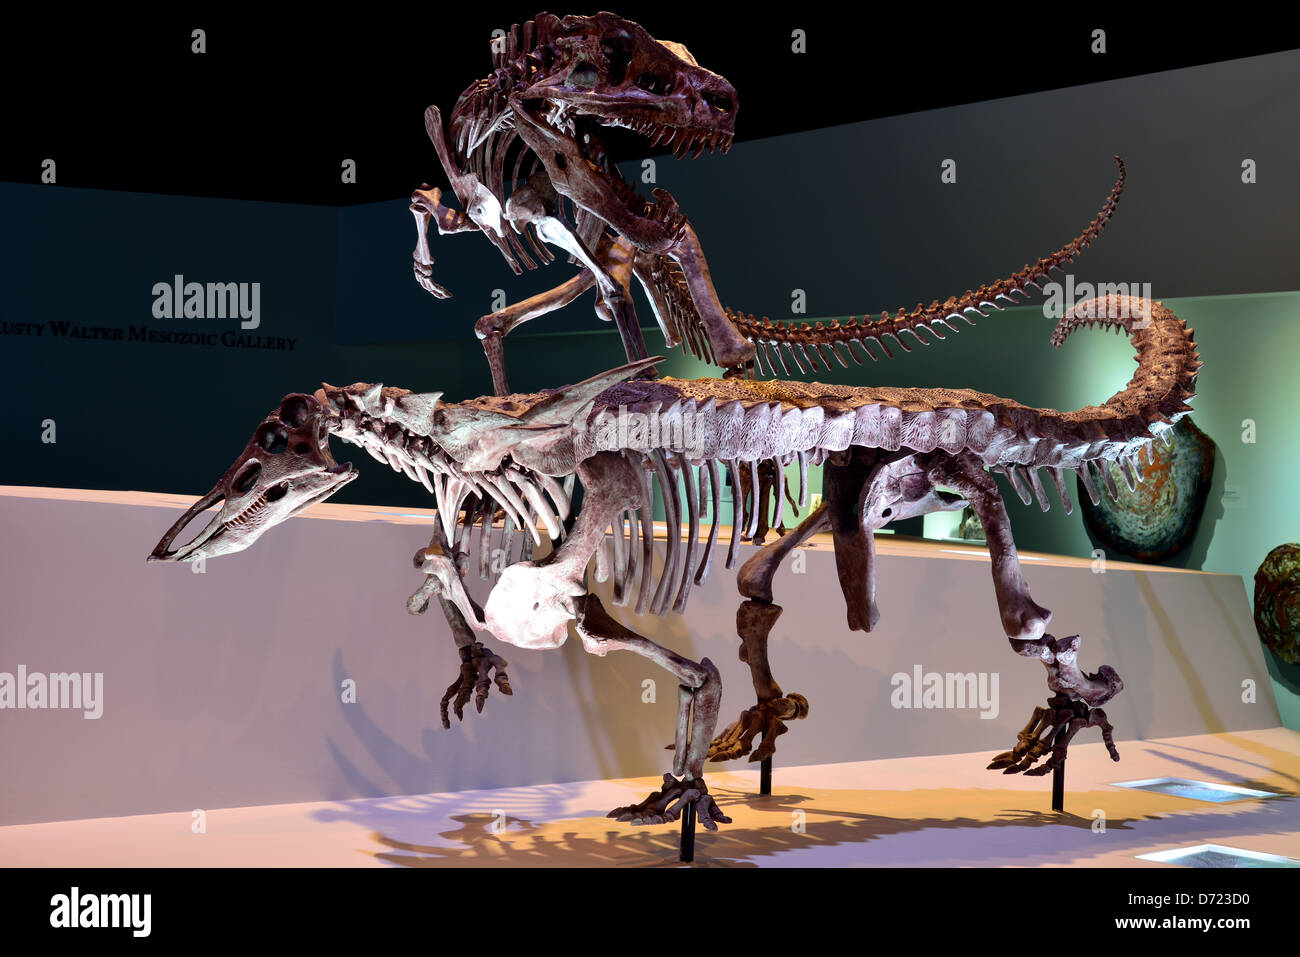 Mounted fossil display of a Postosuchus dinosaur preying on Archosaur. Triassic age. Stock Photo